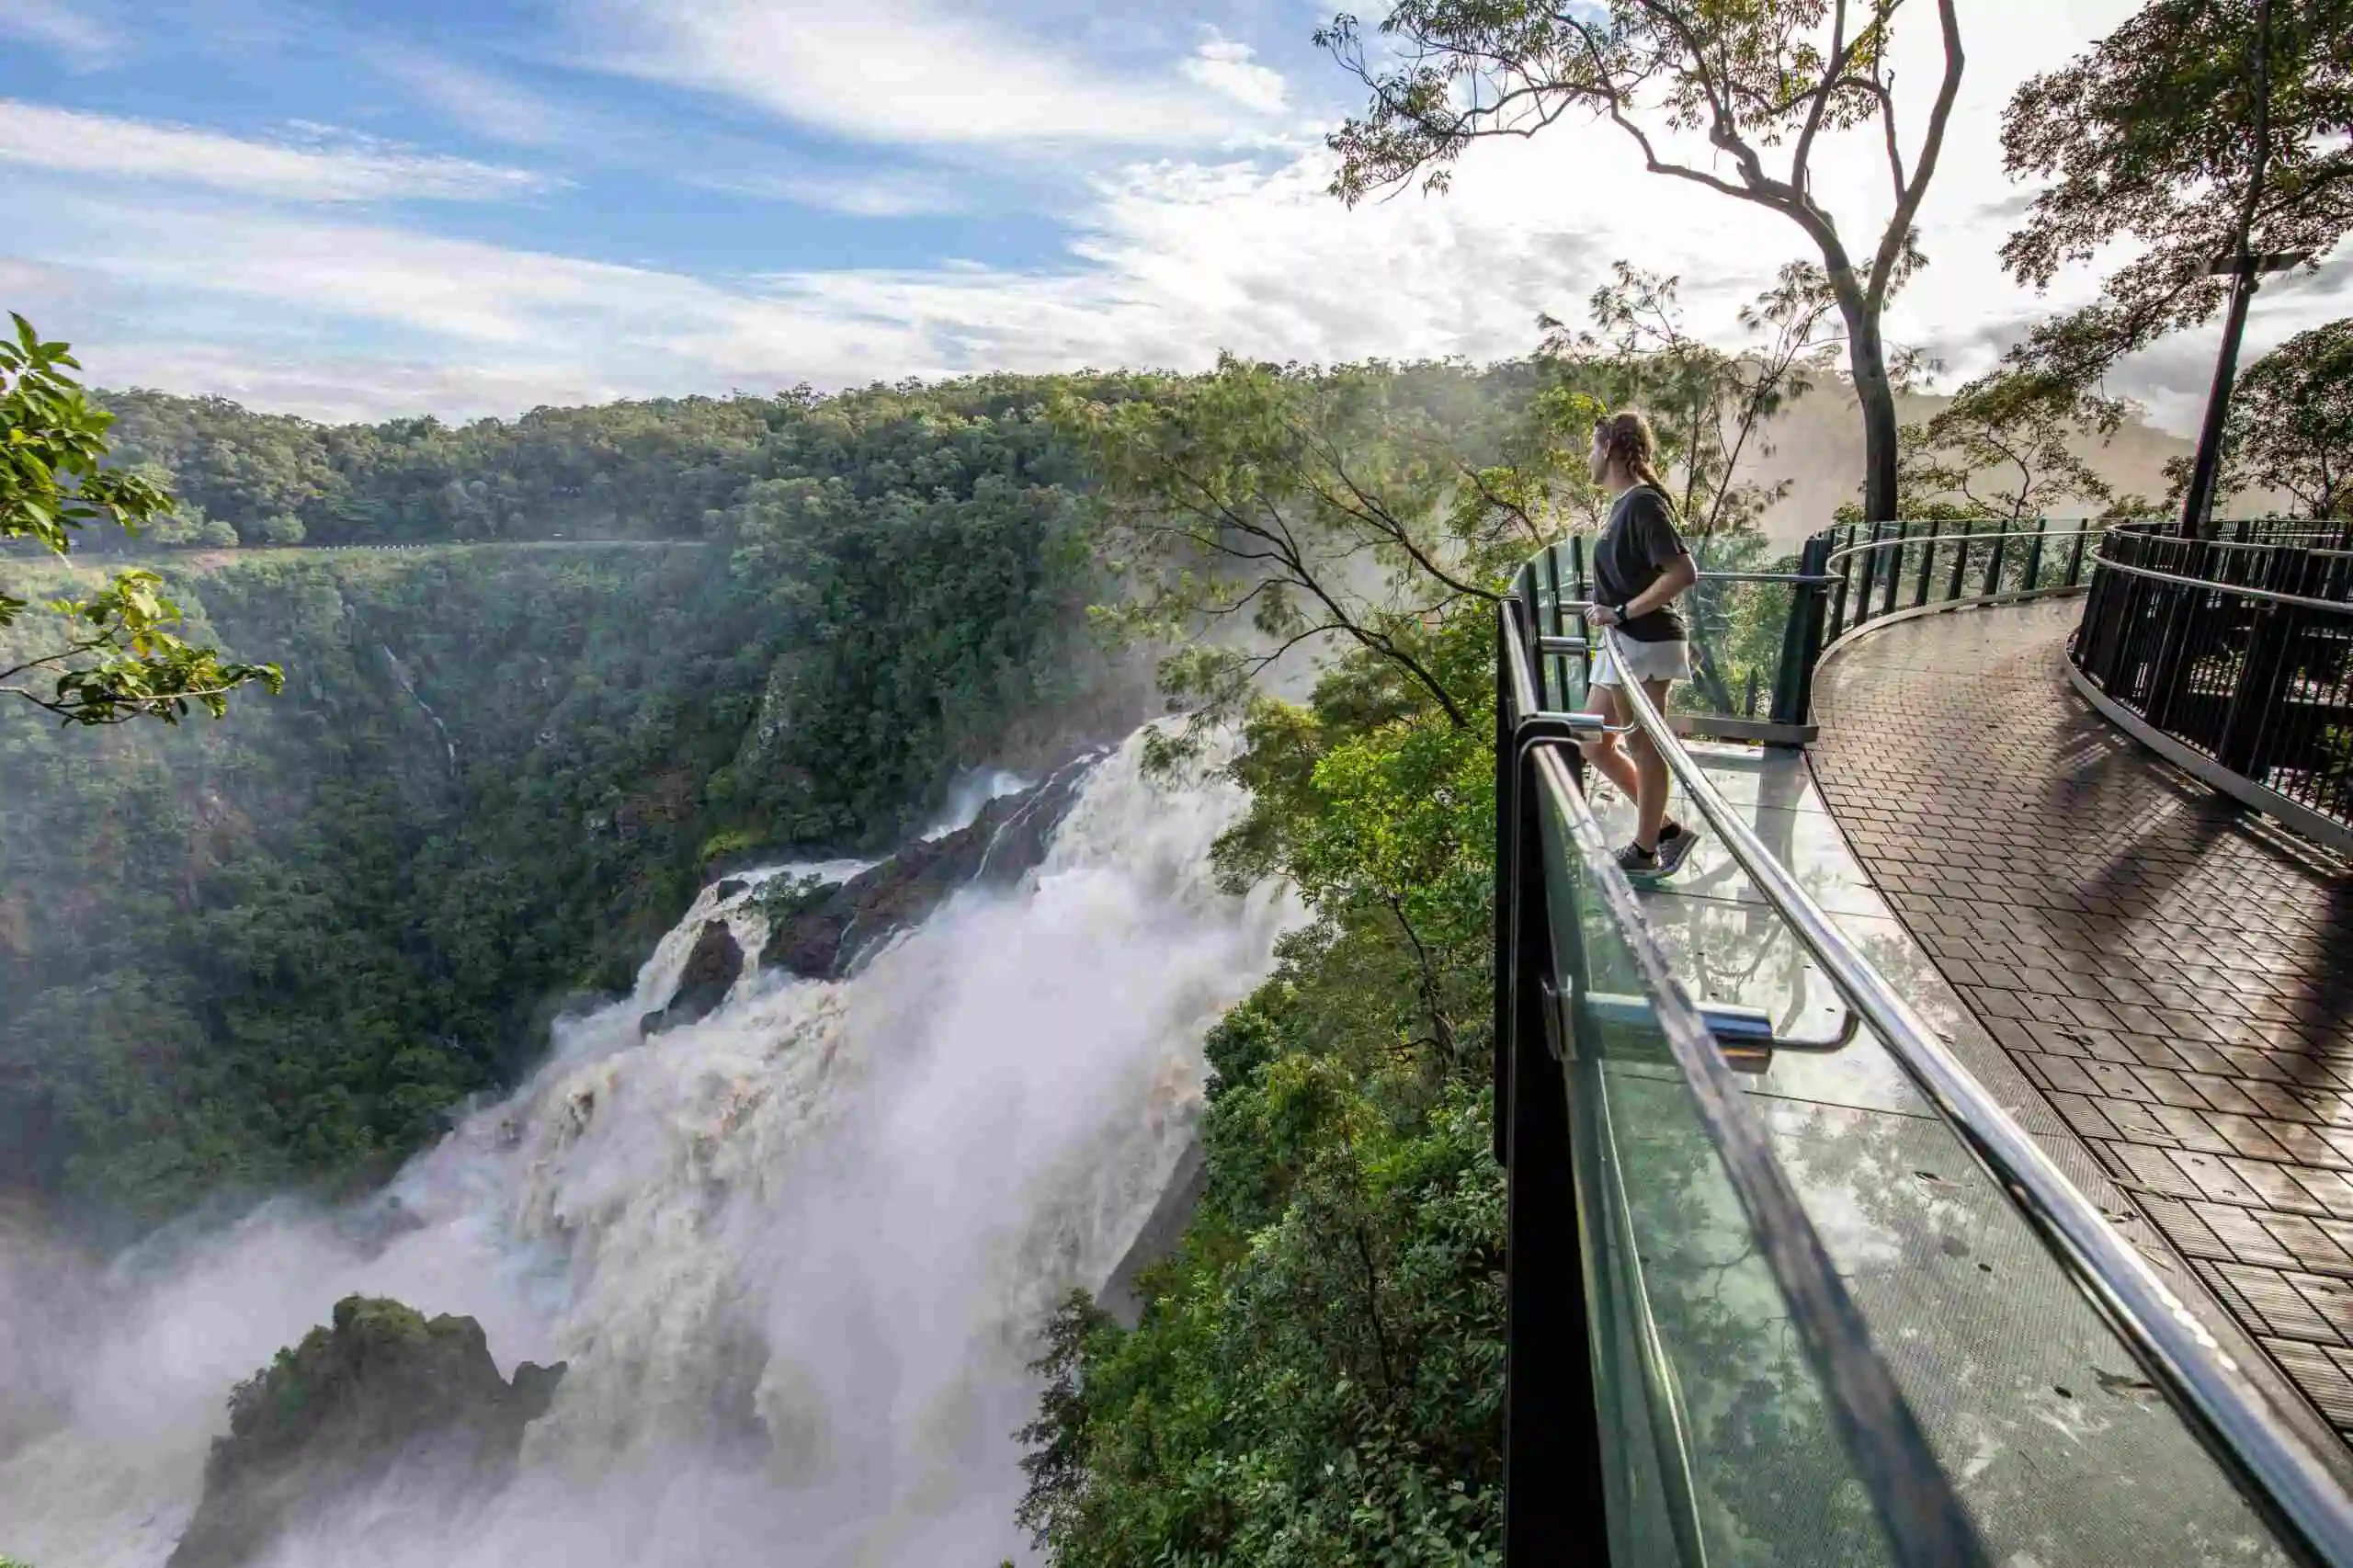 A girl viewing the Barron Falls in flood at Skyrail's The Edge lookout.